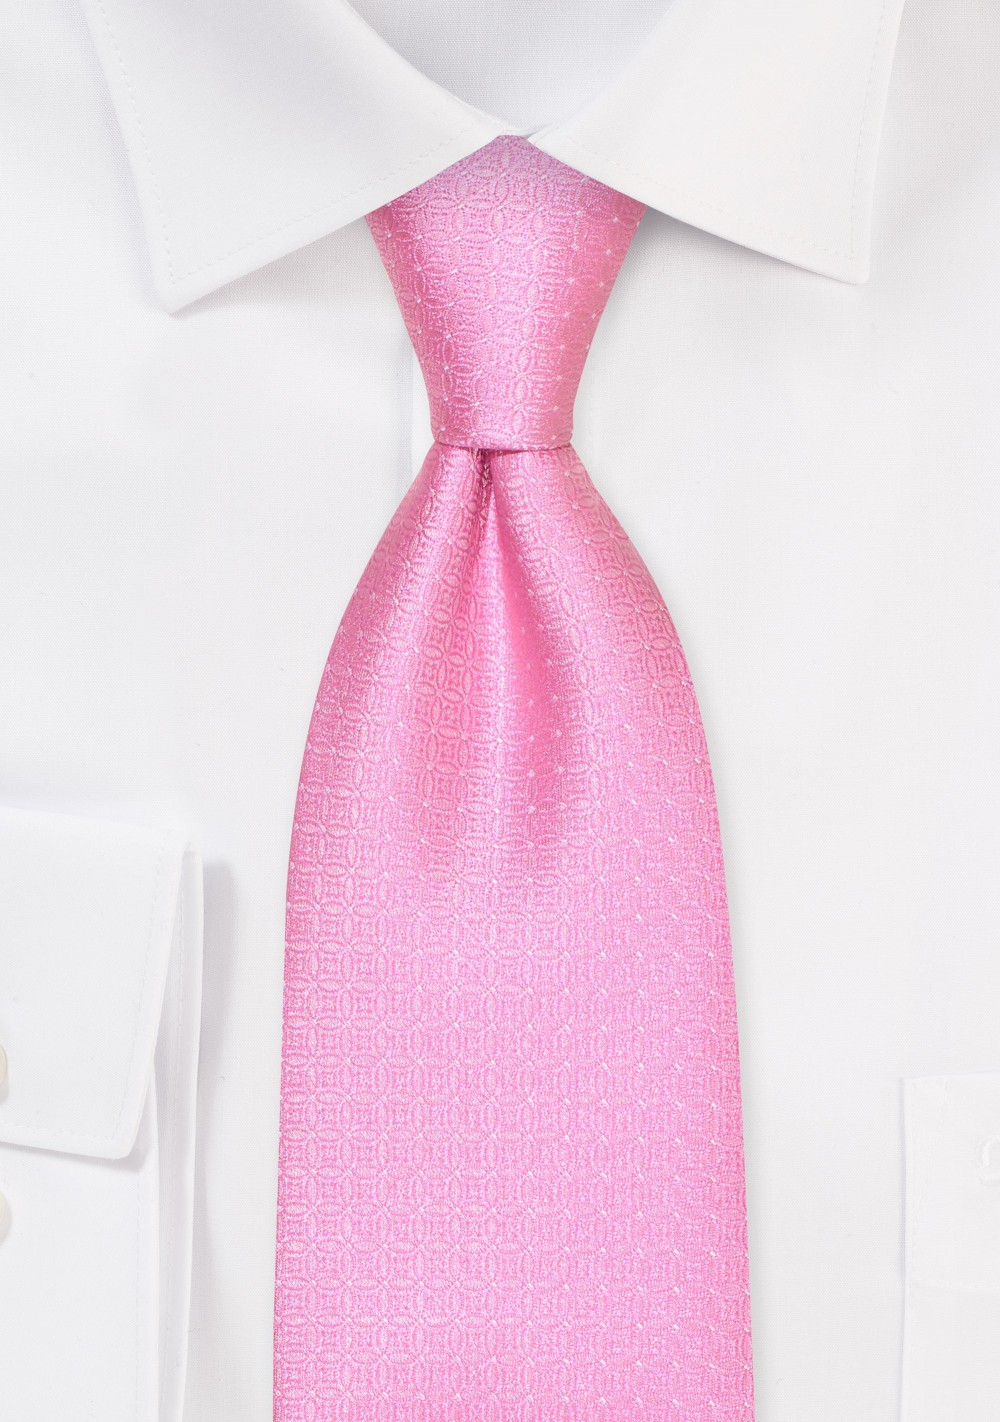 Pink Kids Tie with Monochromatic Woven Check Pattern